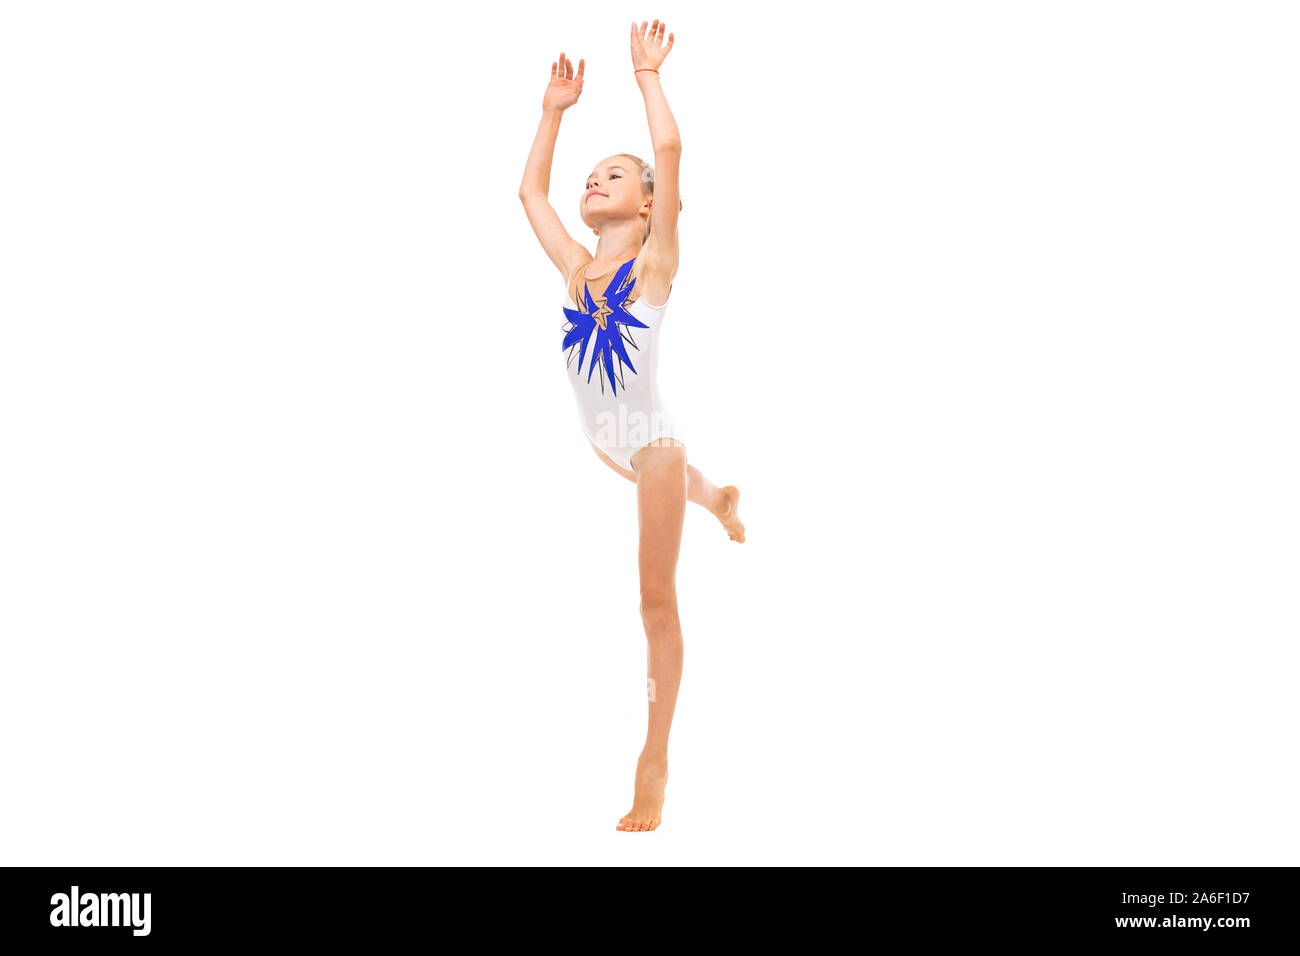 girl gymnast in white trico in full height performs in a white jump isolated on a white background Stock Photo